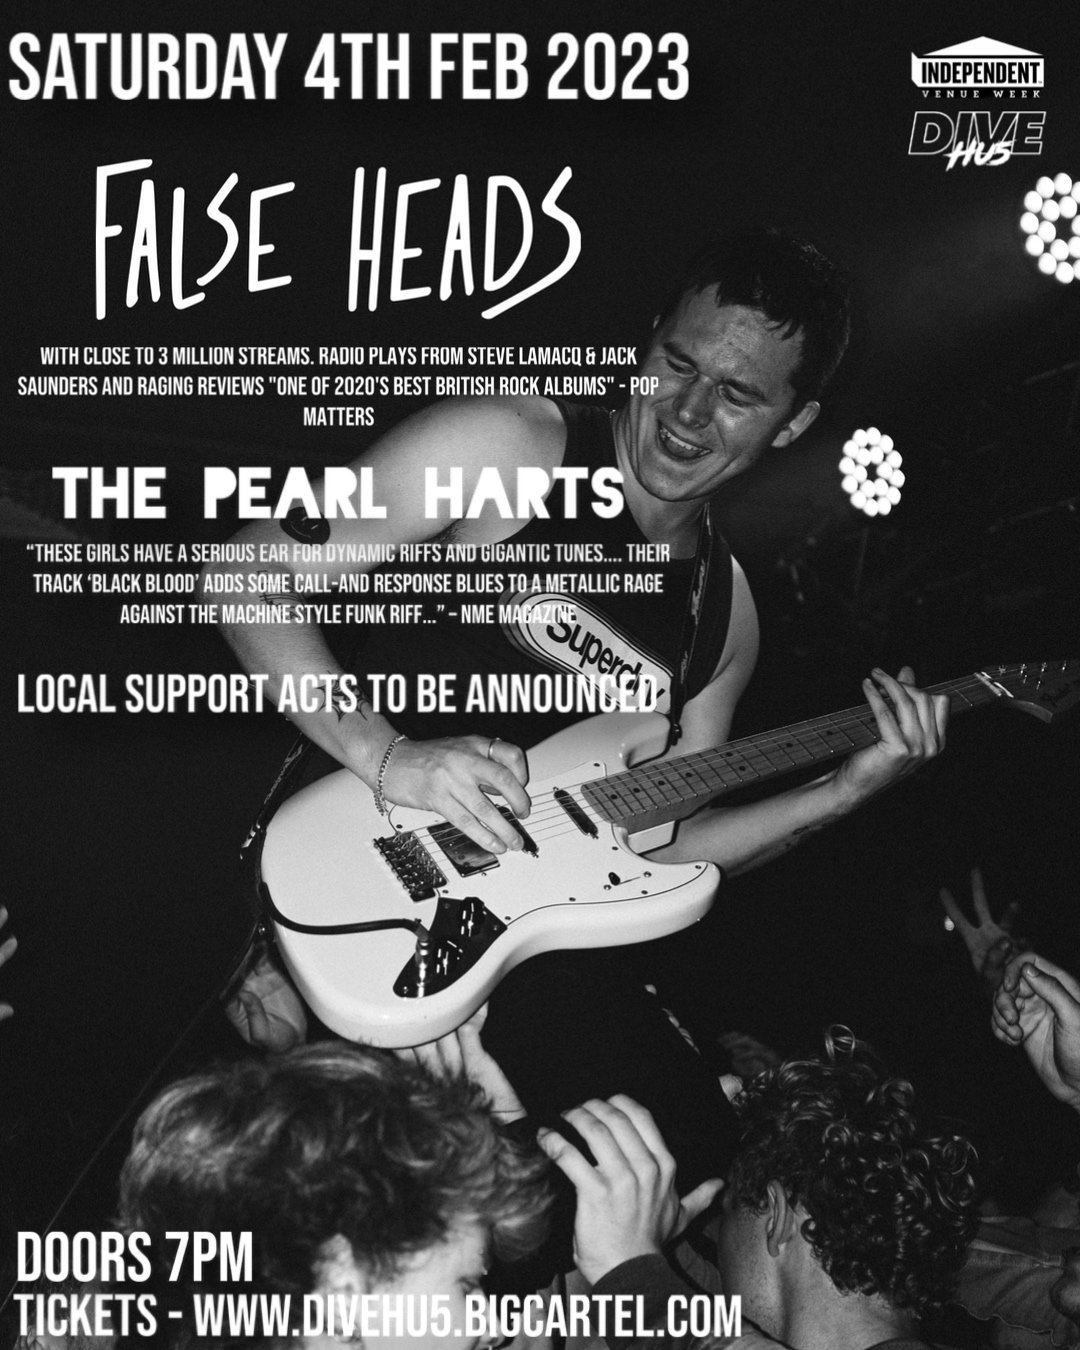 False heads tickets - 4/2/2023 SOLD OUT! 